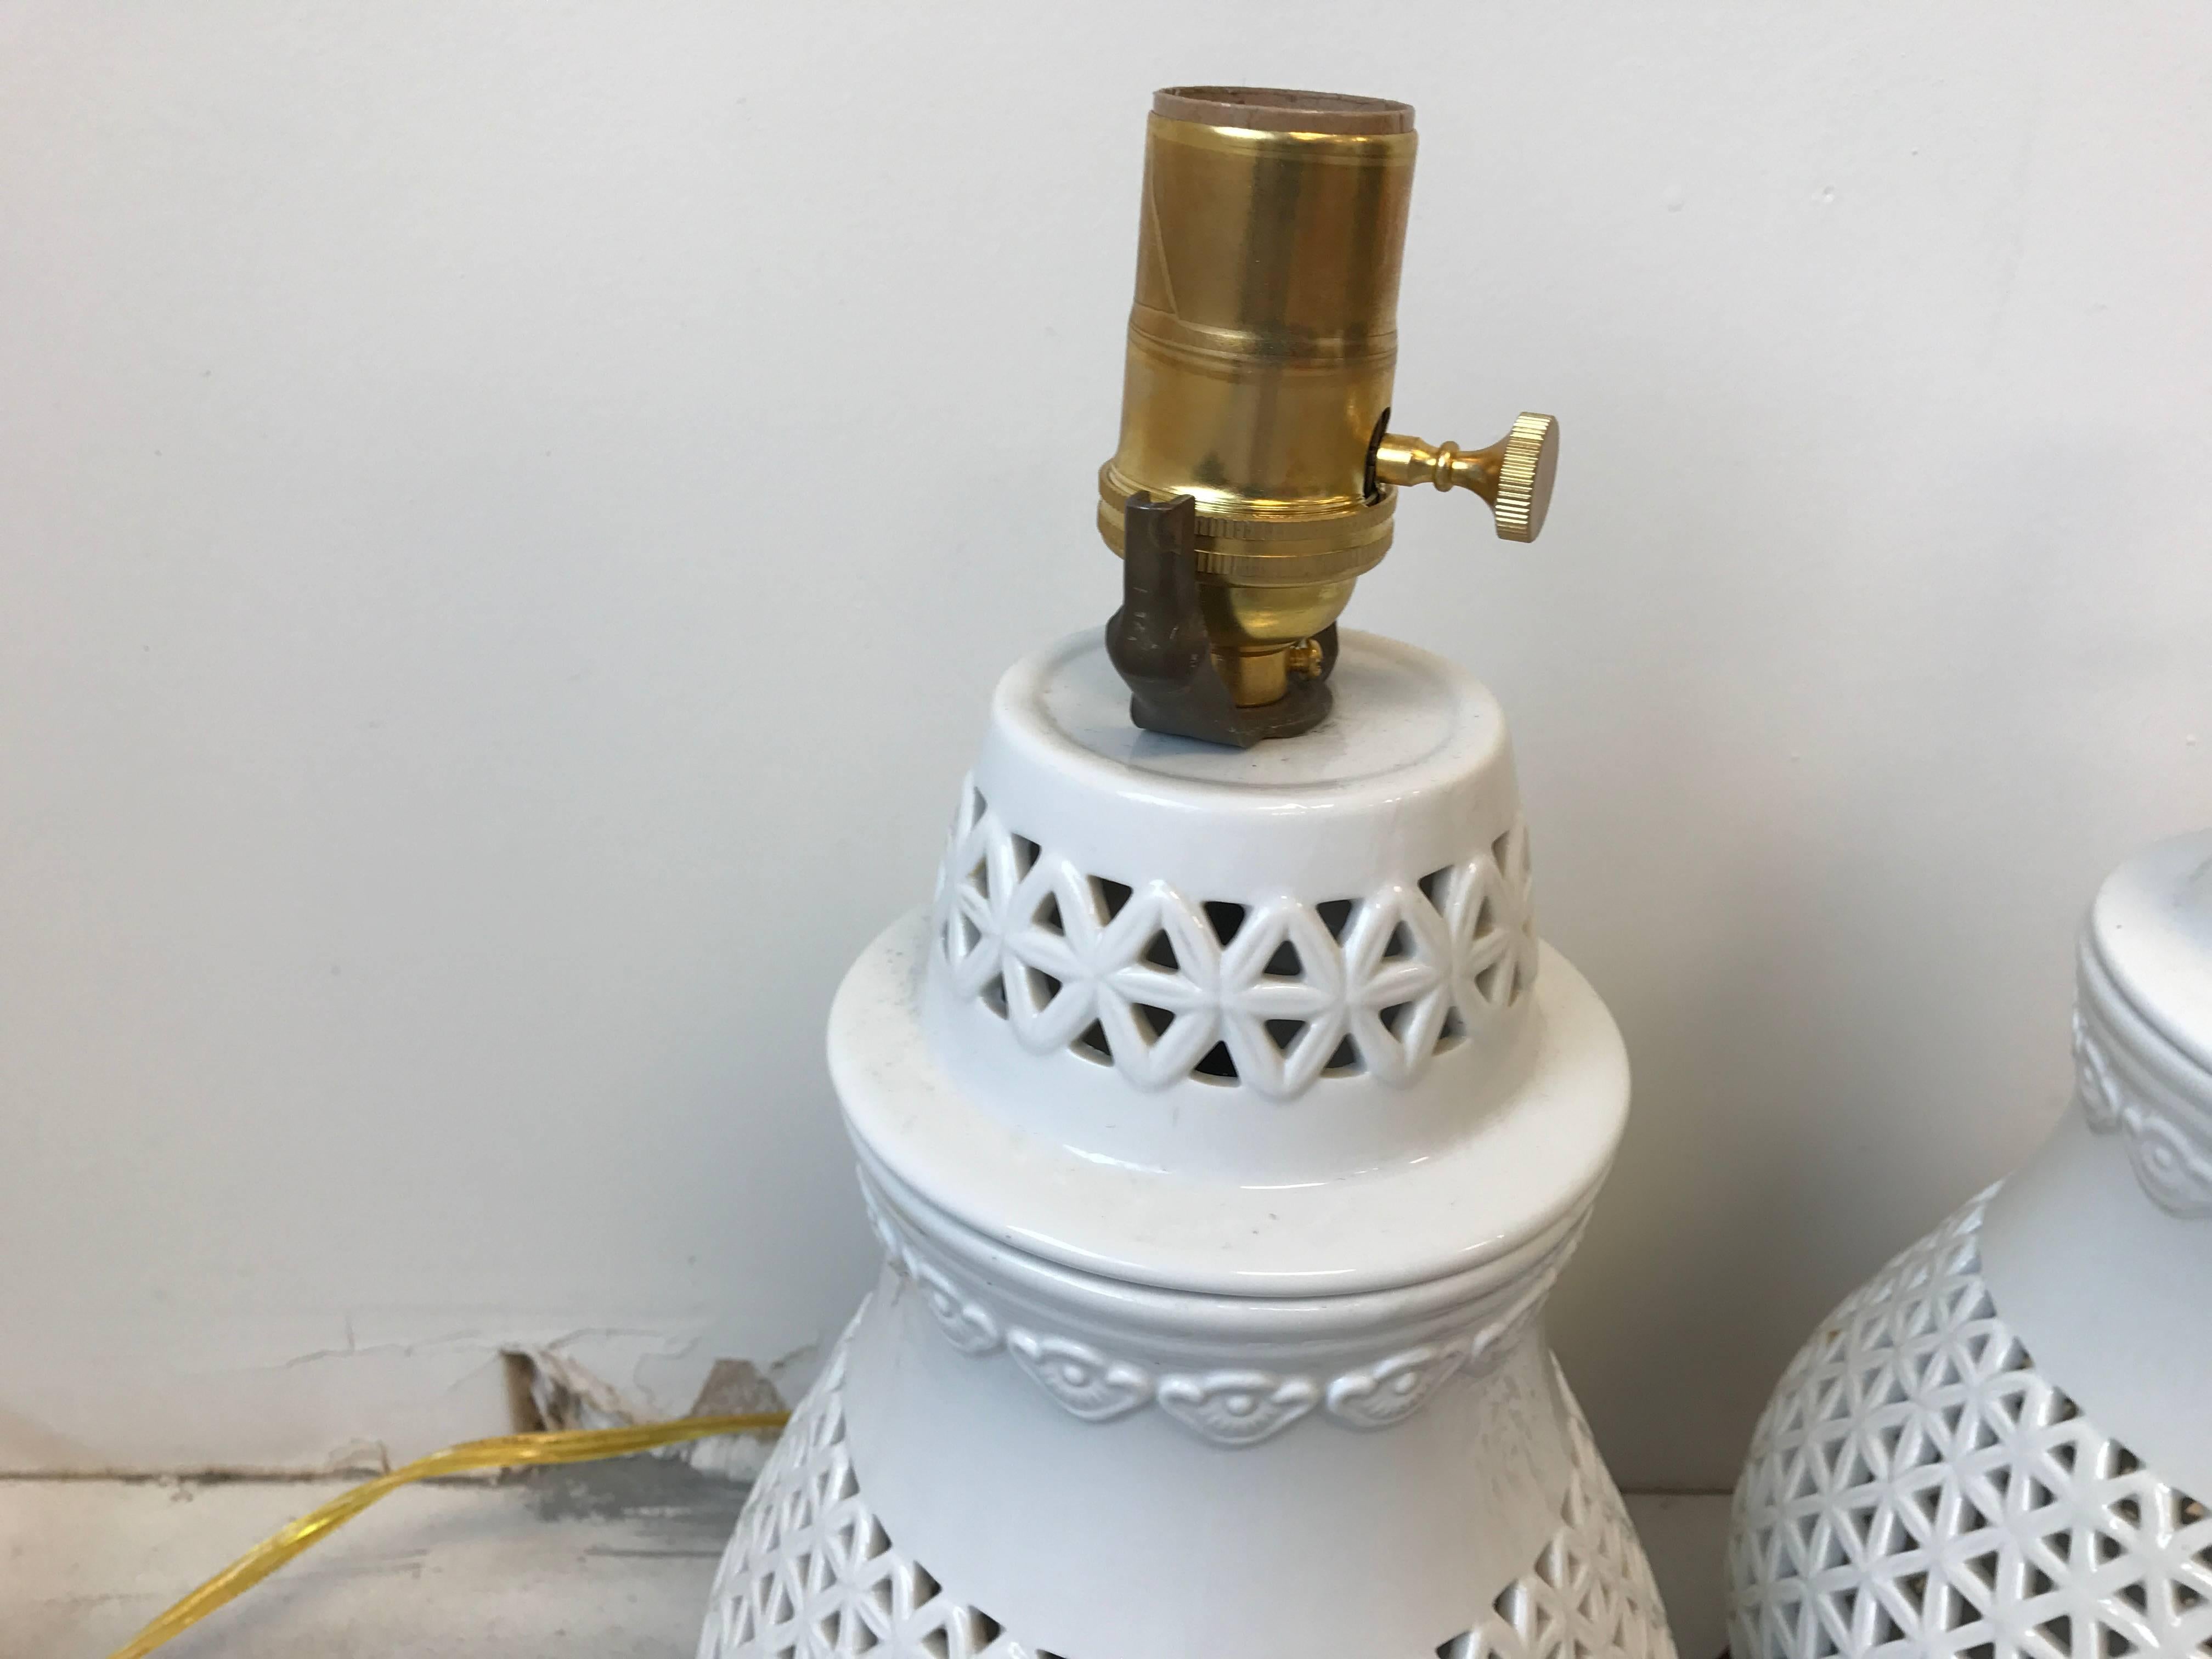 Offered is a stunning, pair of 1960s Blanc de Chine cherry blossom motif lamps. New brass sockets and wiring. The lamps porcelain bodies are in excellent condition. The bases have minor wear finish, but can easily be repainted. Measures: 14.5